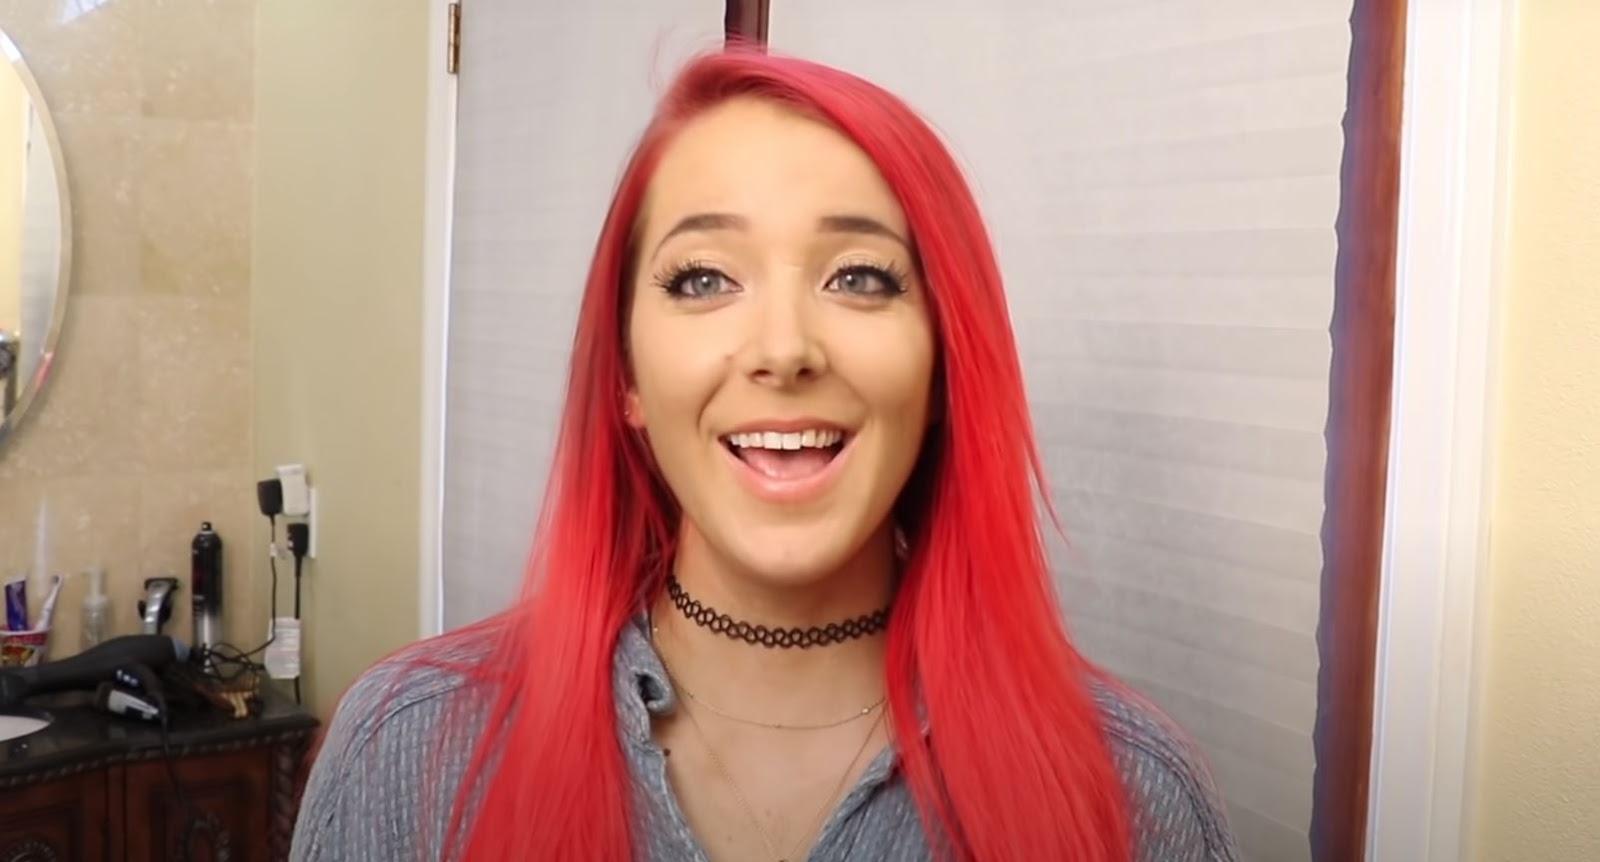 Source - Jenna Marbles Official YouTube Channel